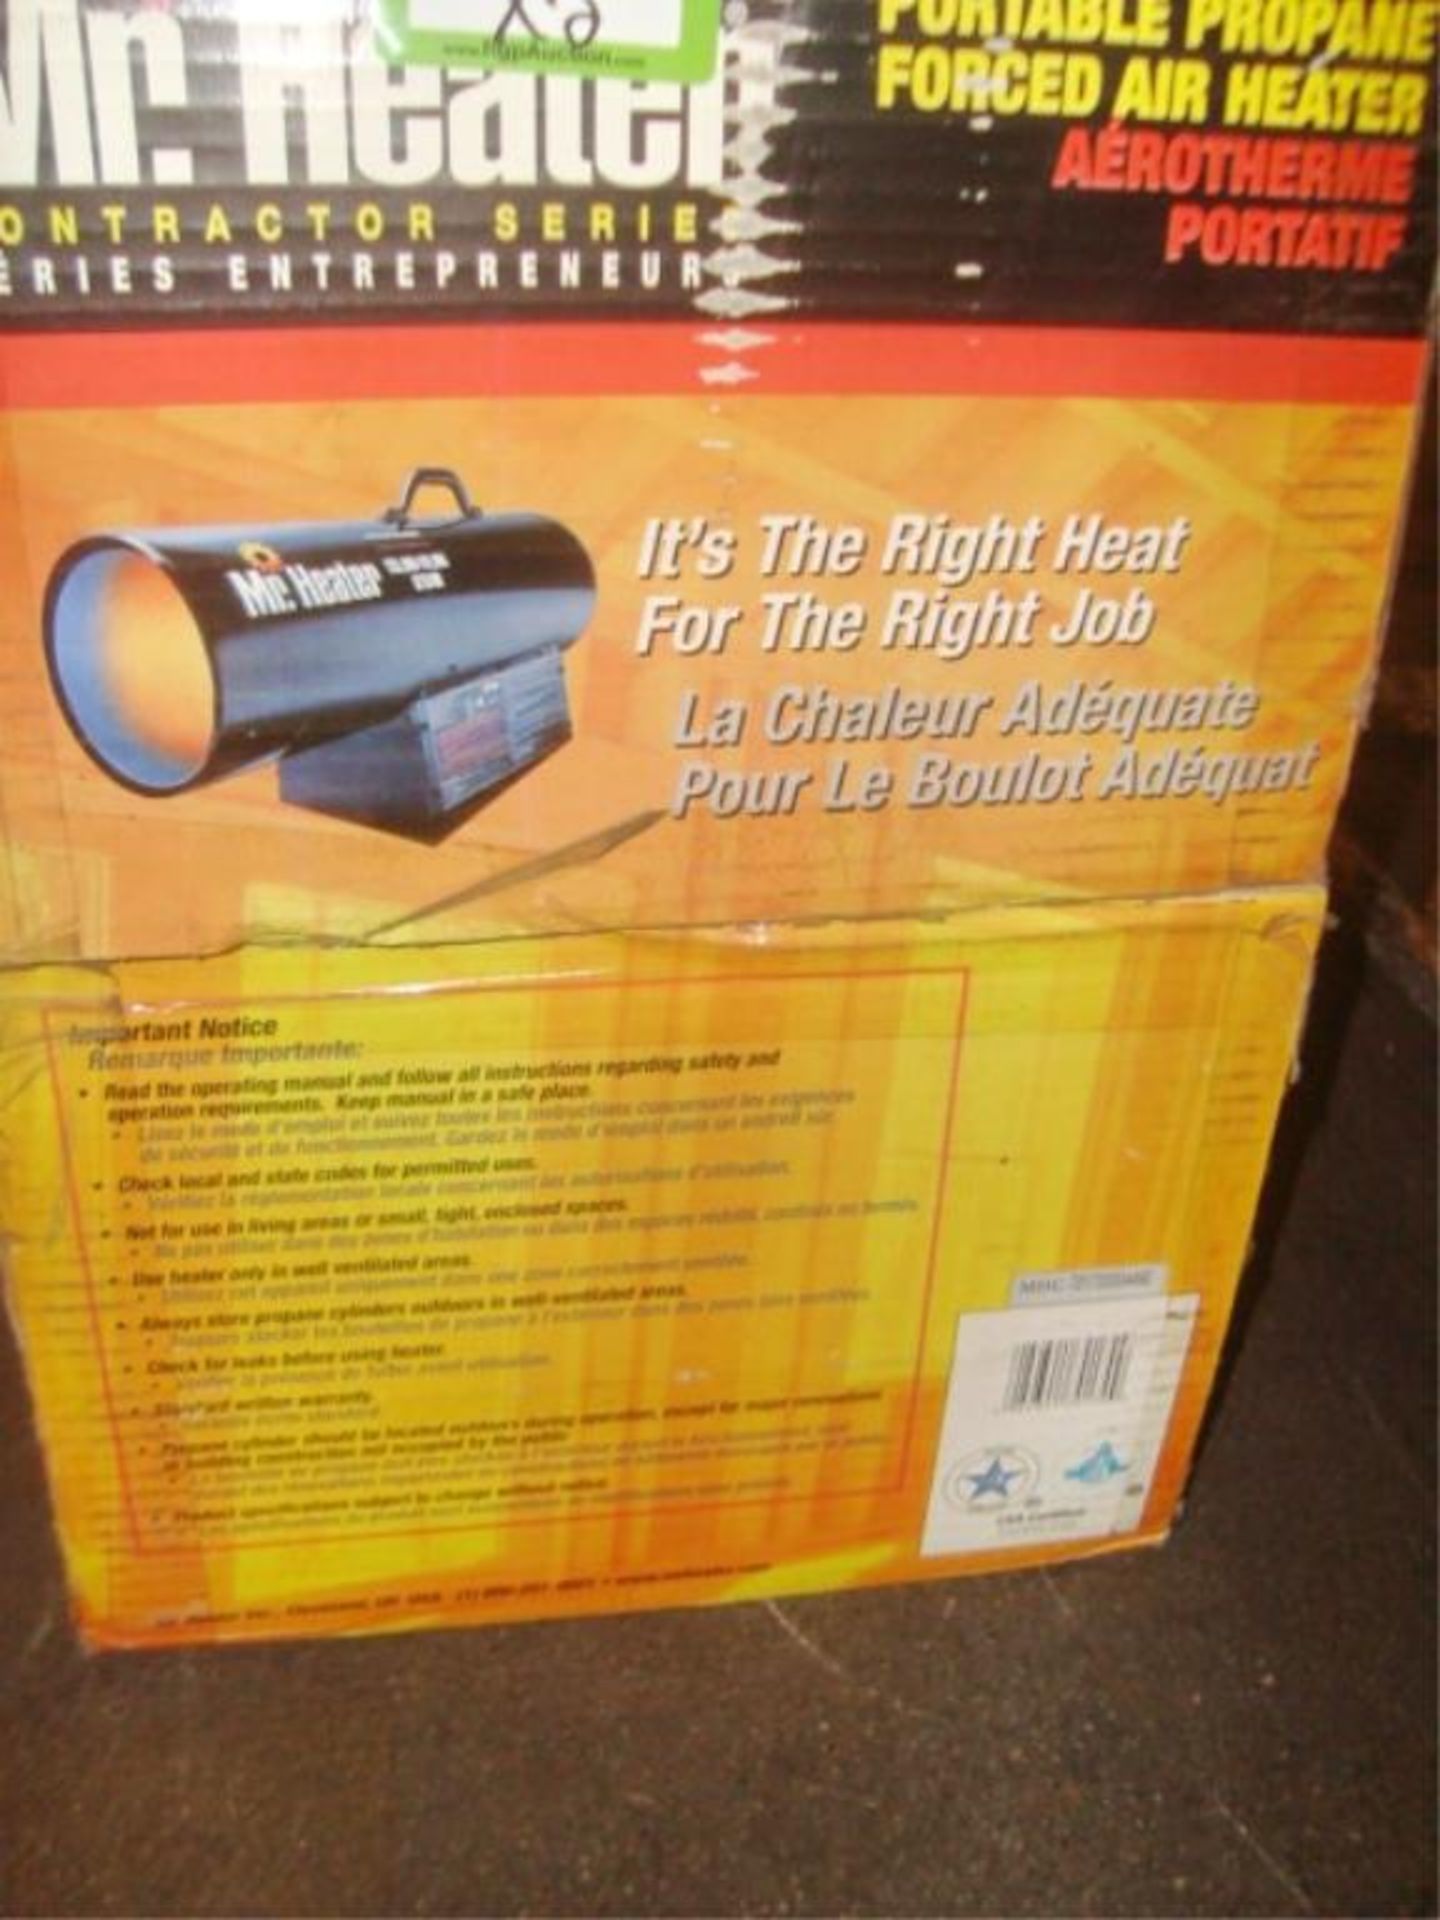 Portable Propane Heaters - Image 4 of 7